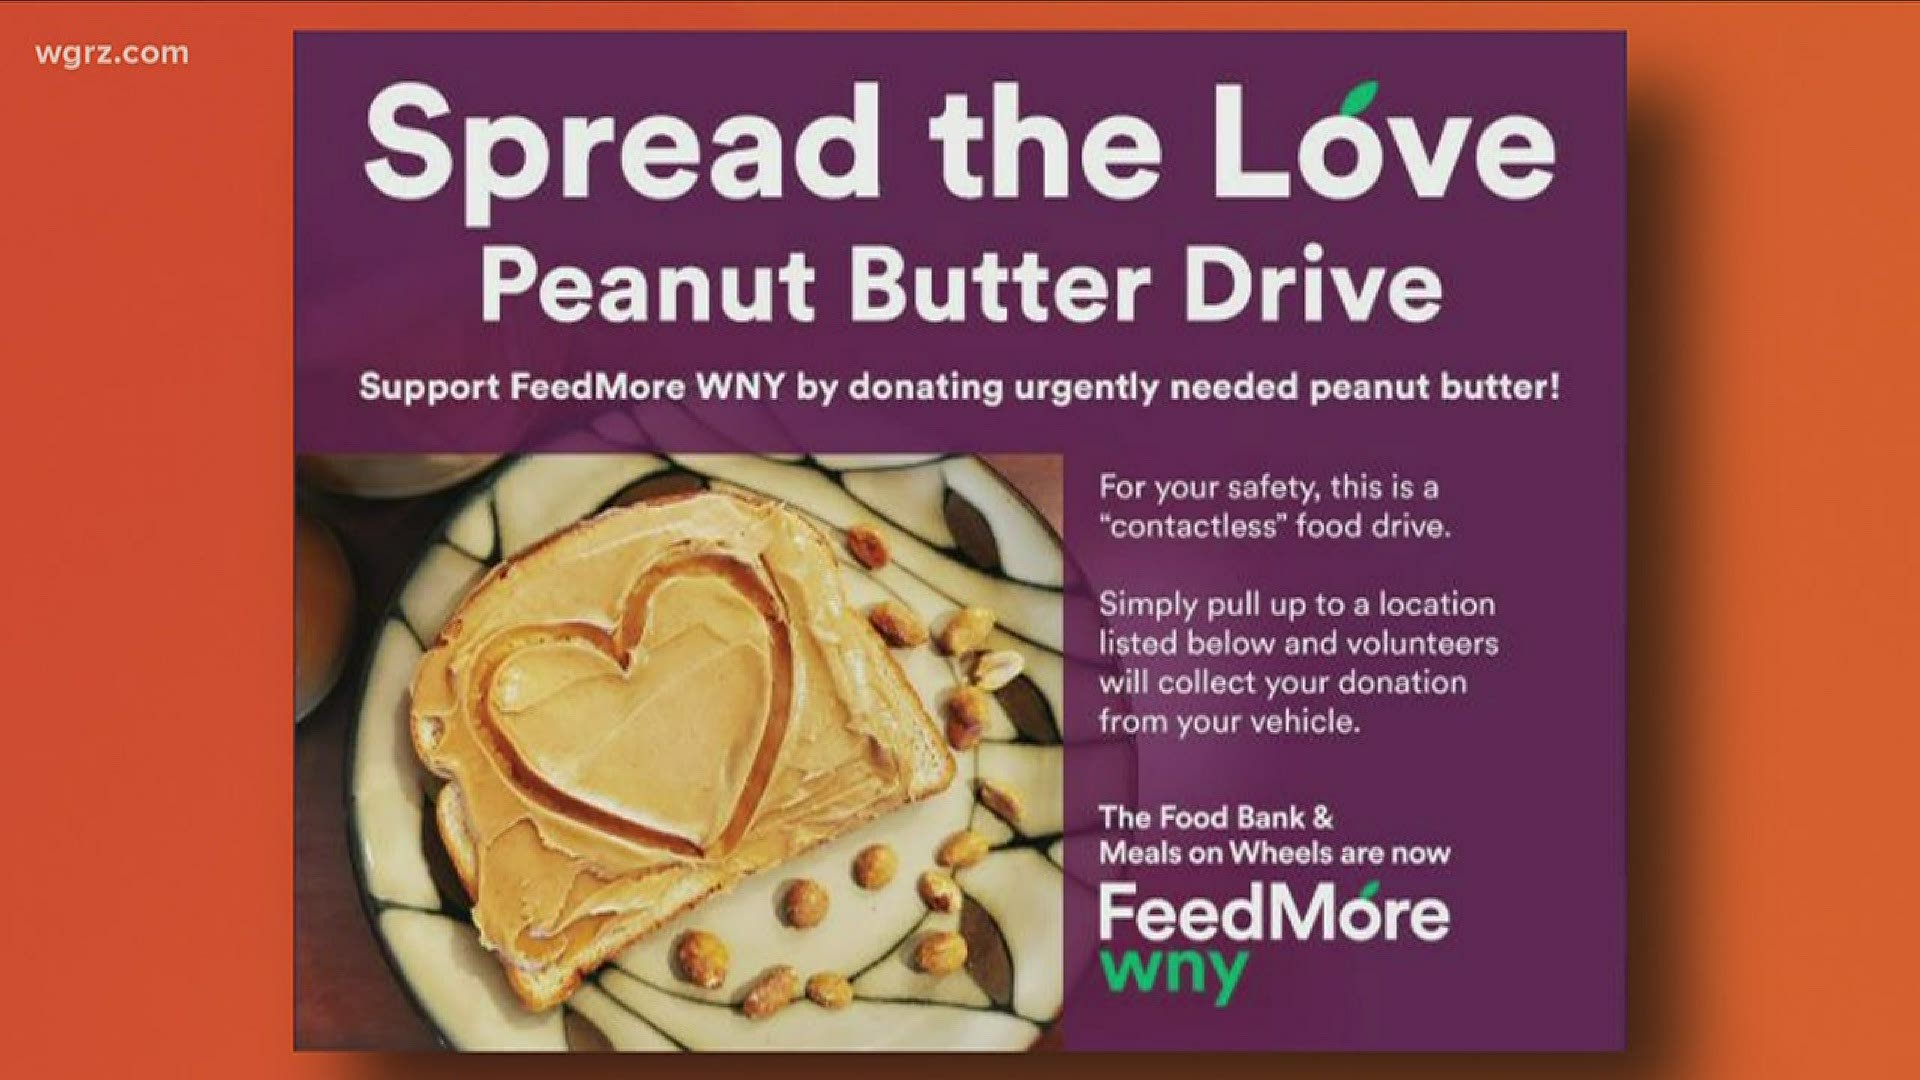 FeedMore WNY is collecting peanut butter and other canned or boxed food items at several locations Saturday morning.